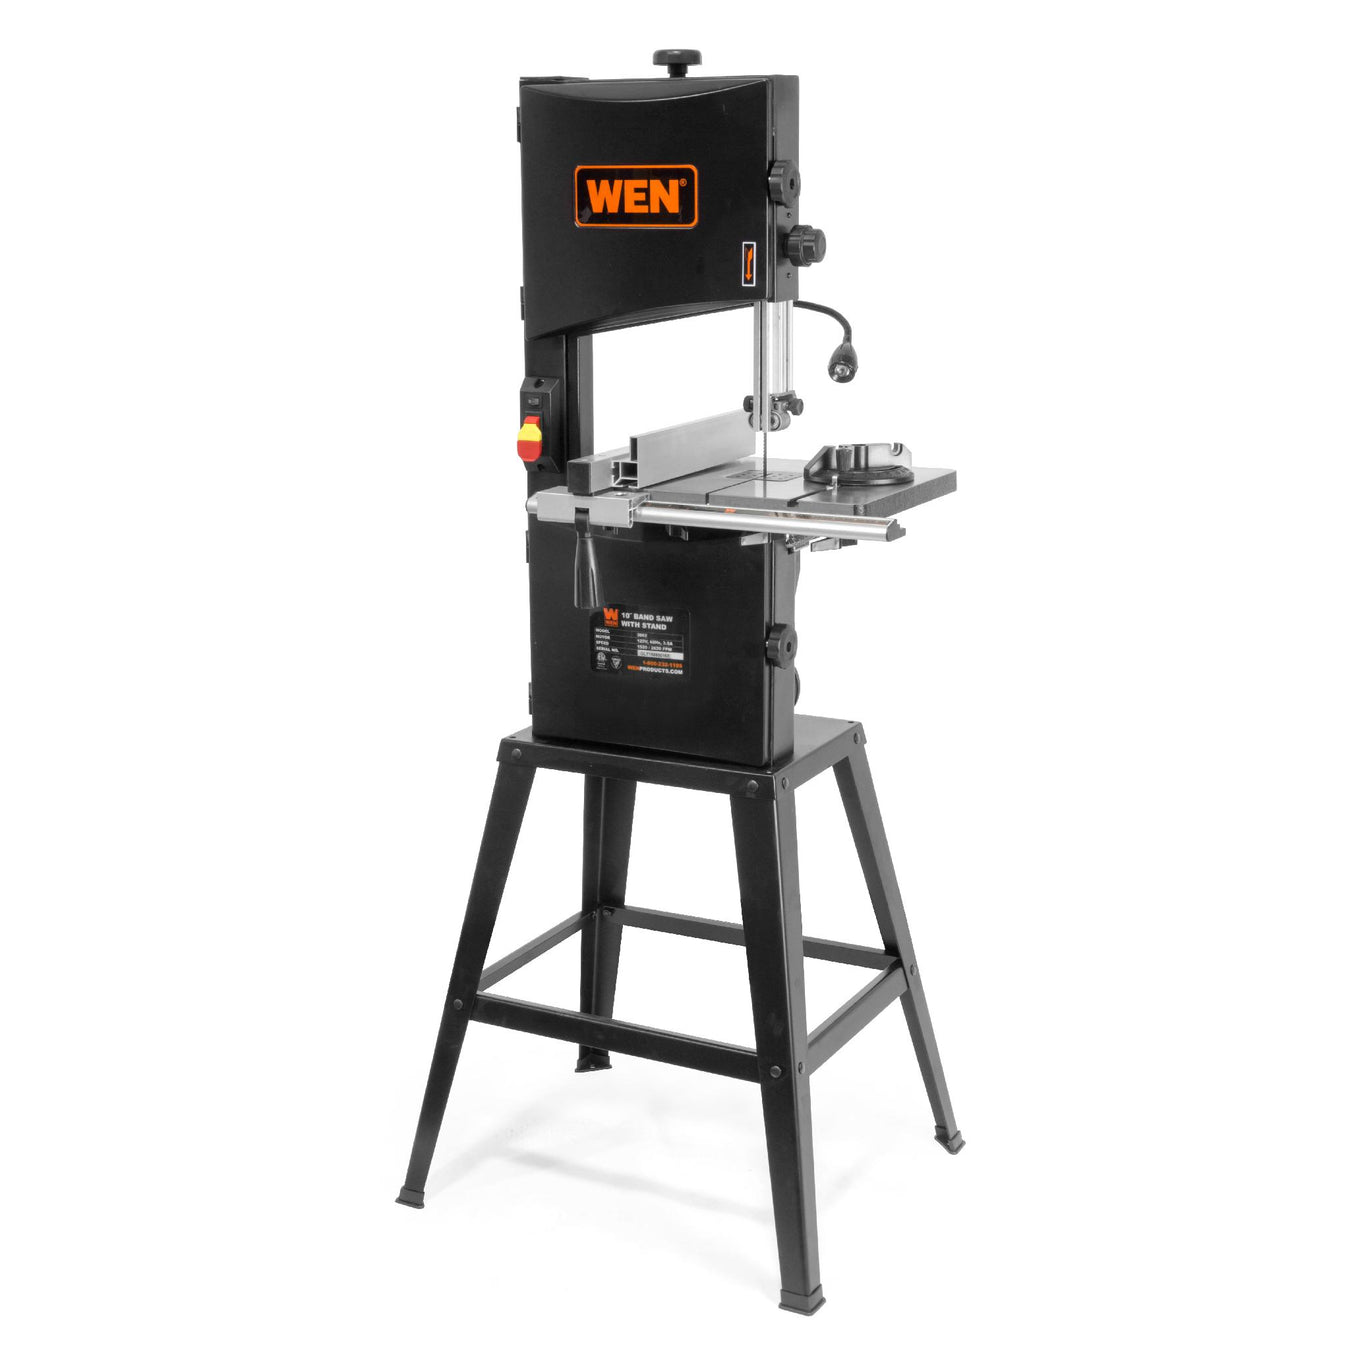 Woodworking and Metalworking Bandsaws